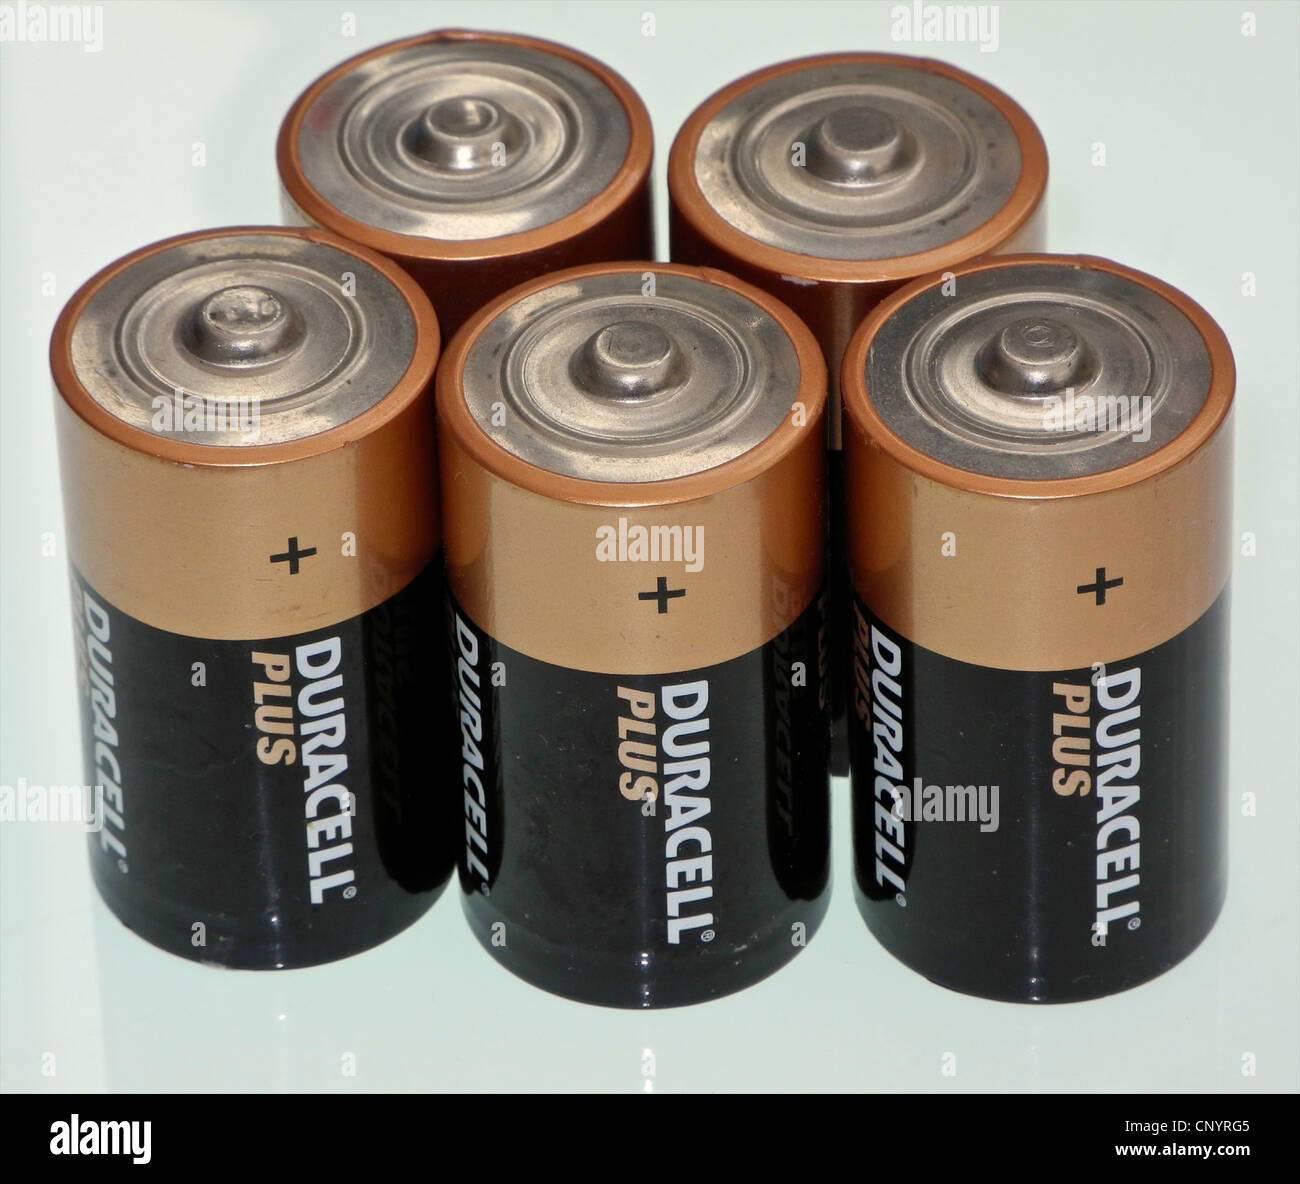 Duracell batteries, these are 'D' size cells EDITORIAL USE ONLY Stock Photo